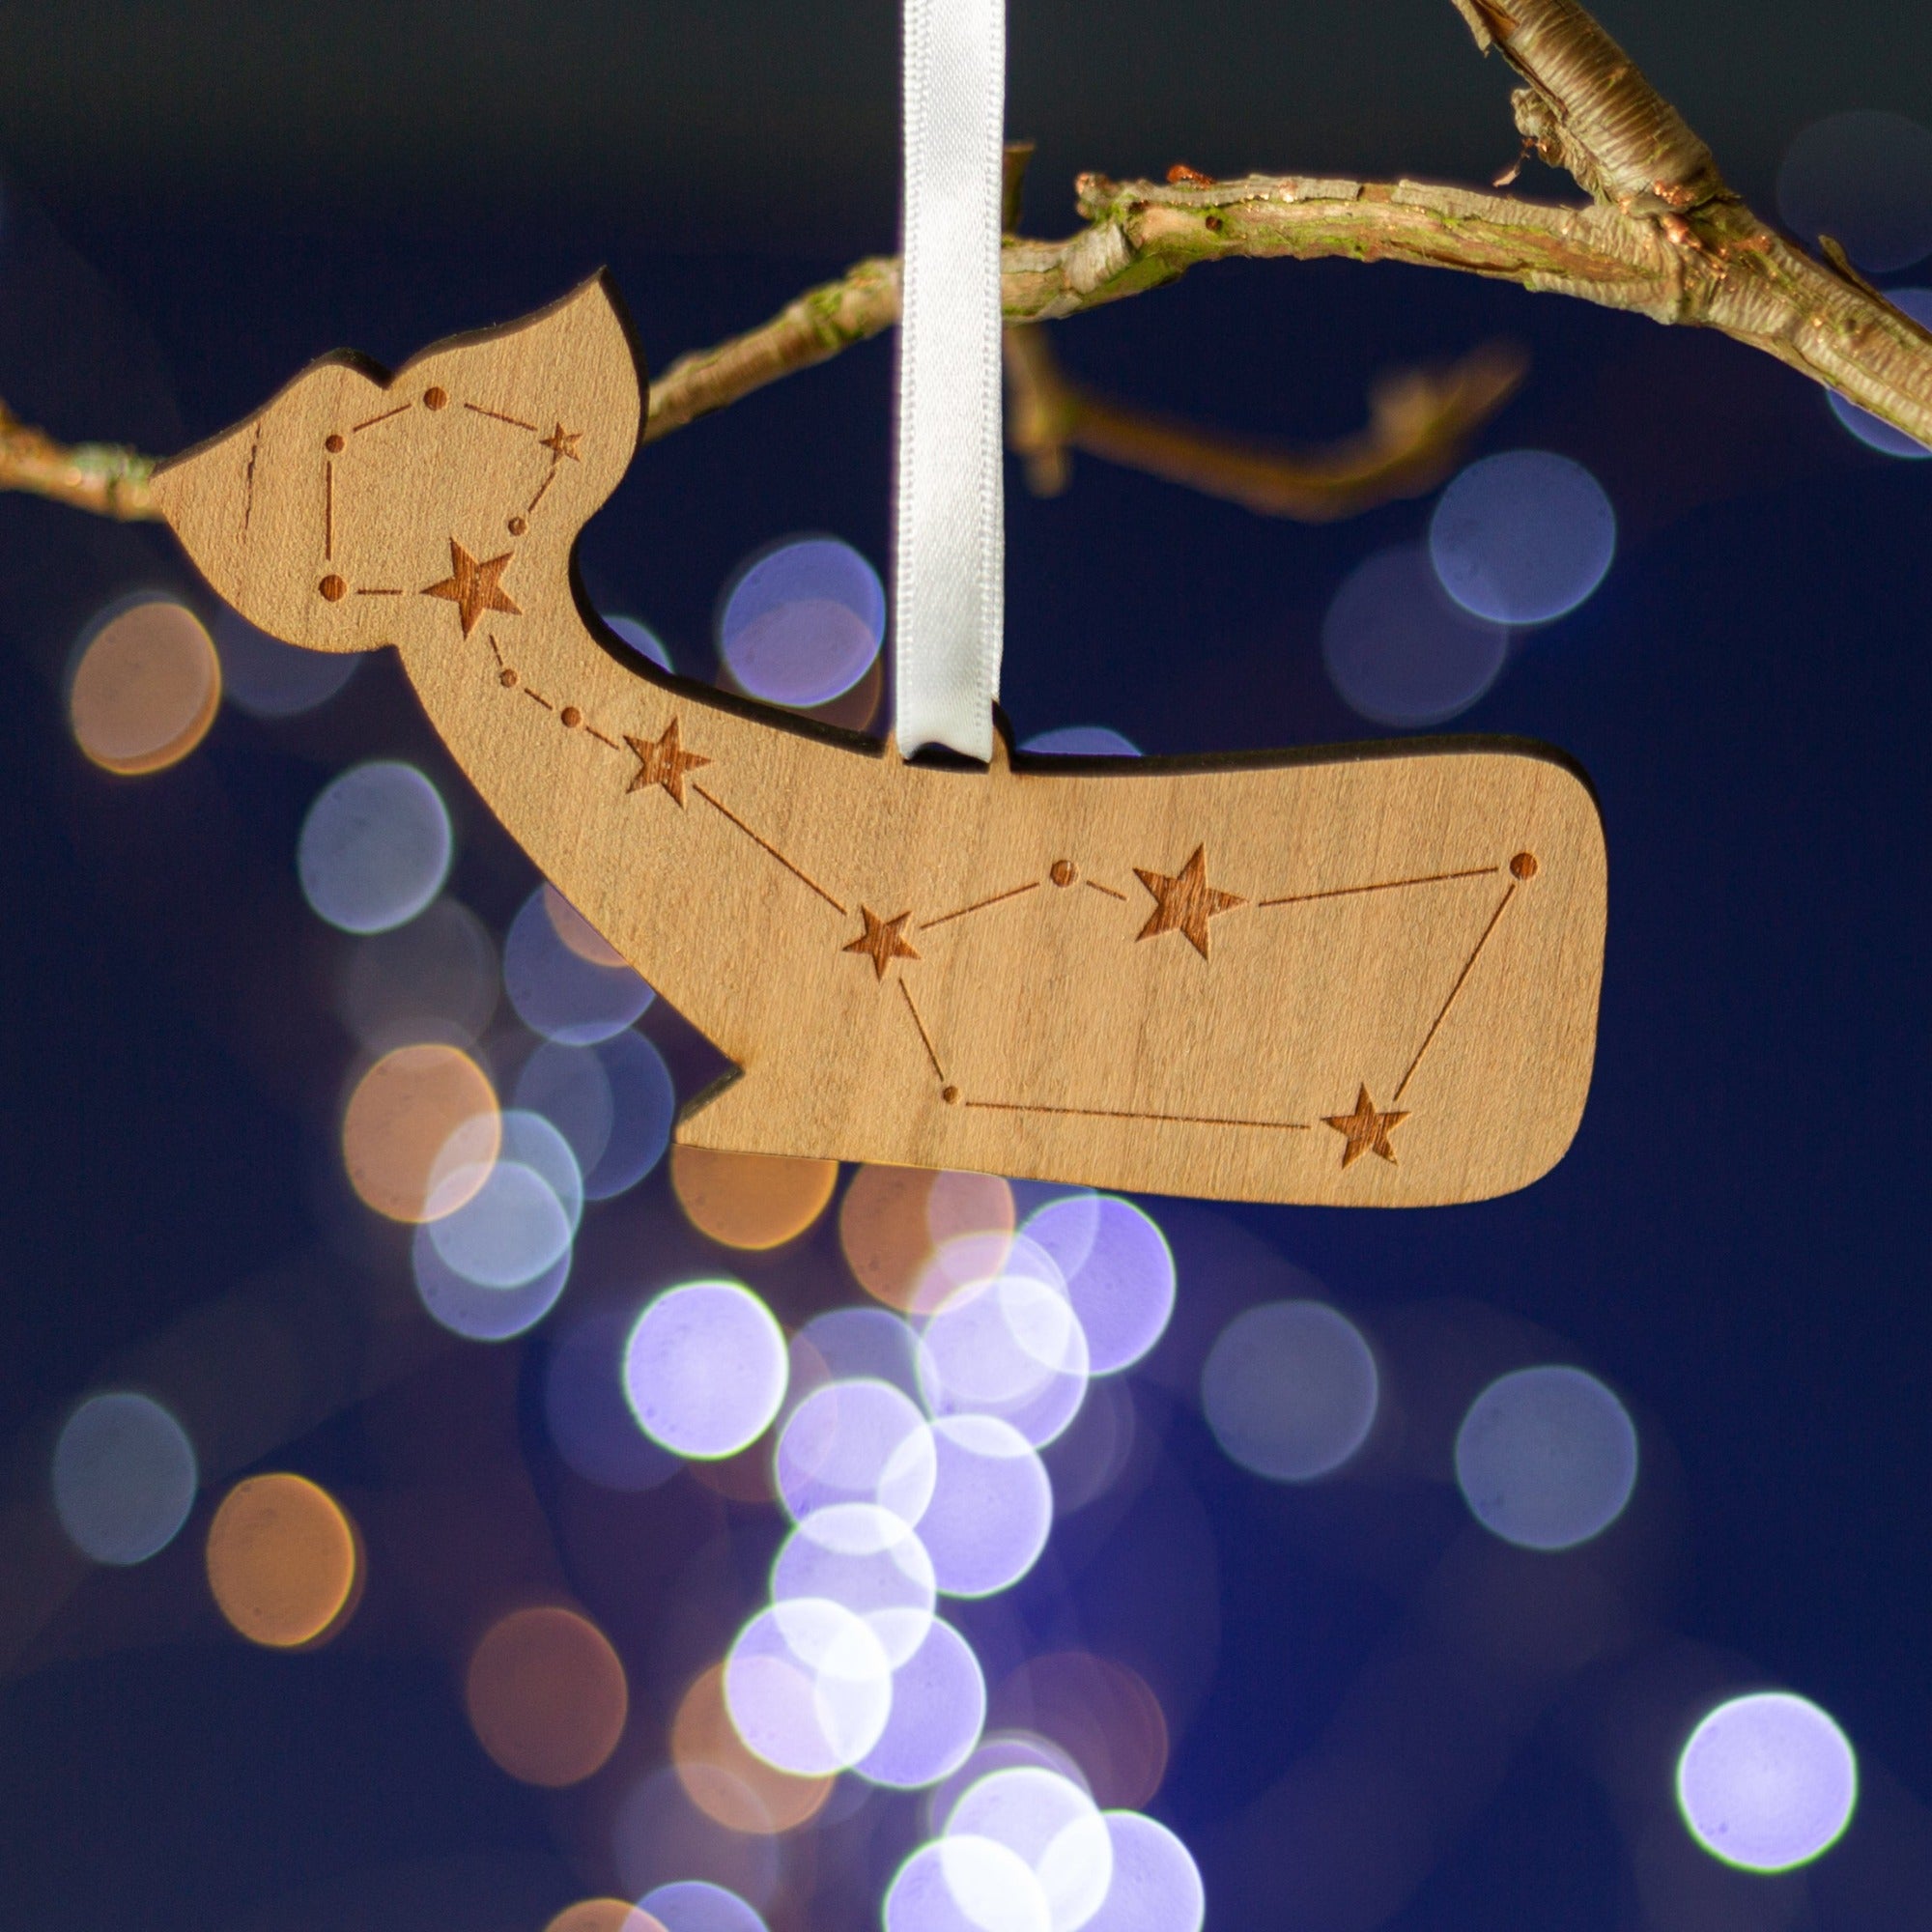 Wooden Christmas decoration in the shape of a while, with stars engraved on the front.